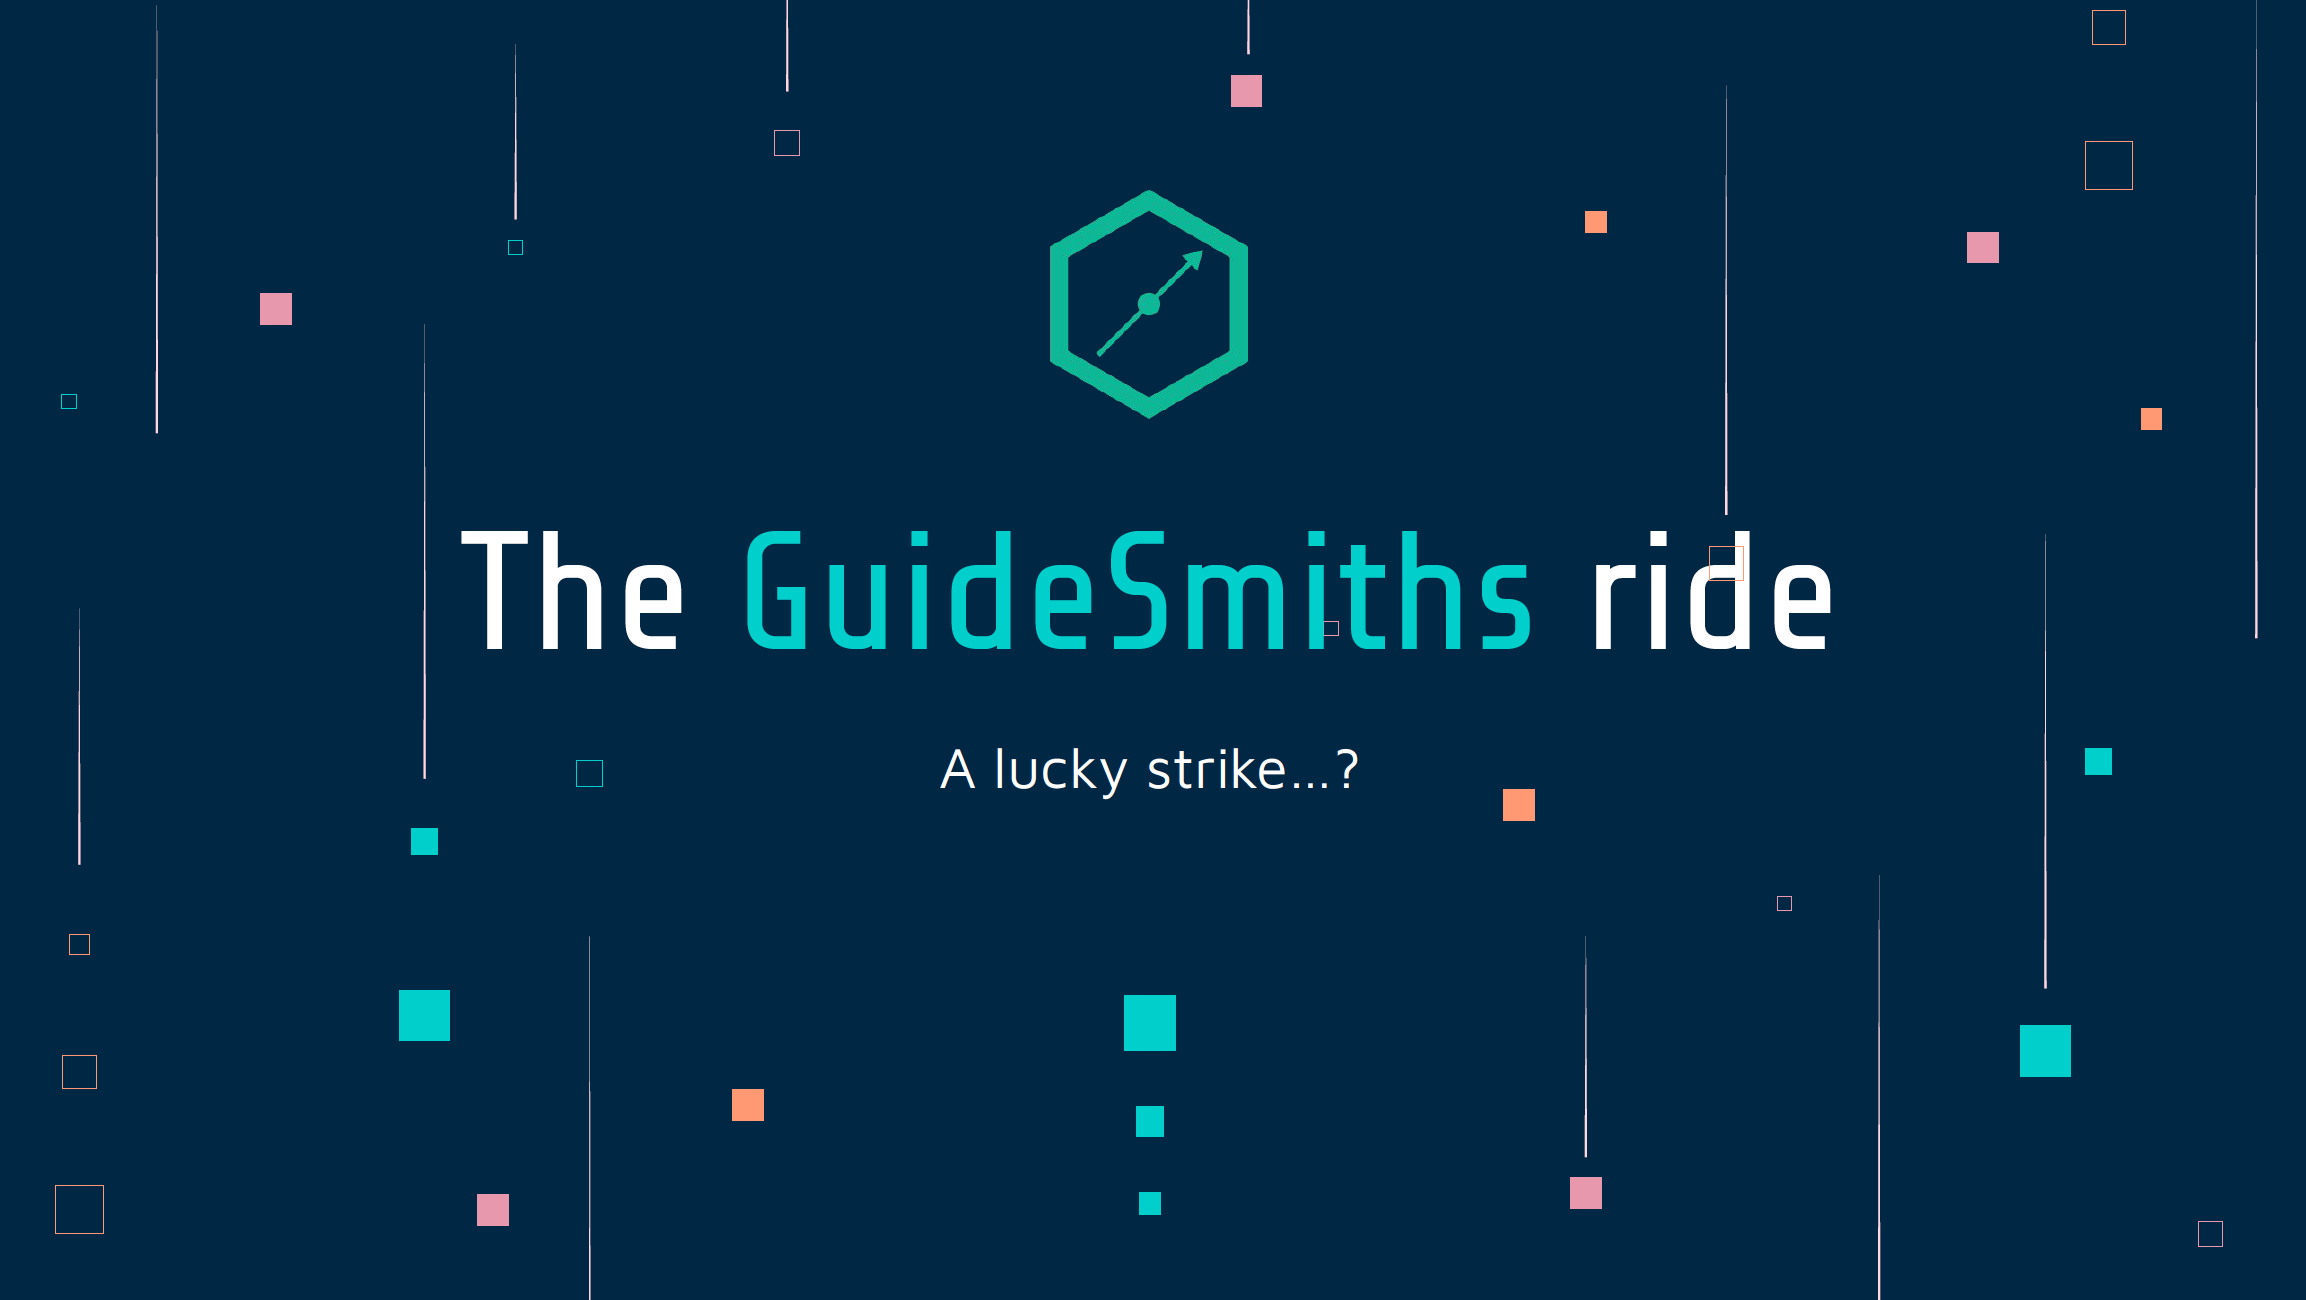 The GuideSmiths ride